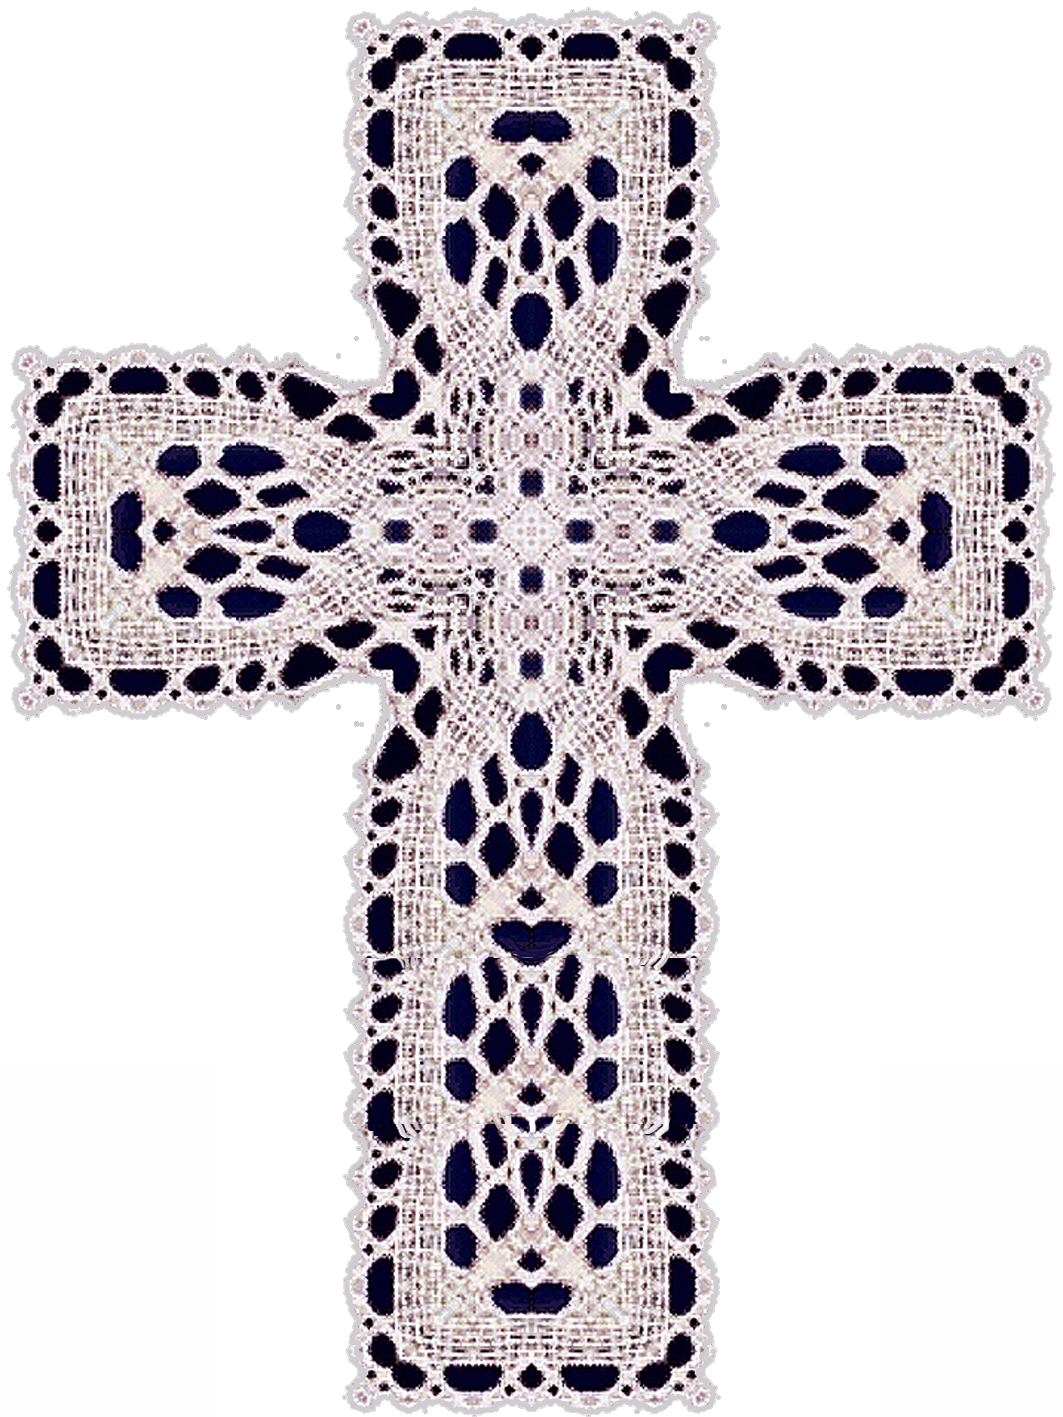 35 Christian Cross Clip Art Free Cliparts That You Can Download To You